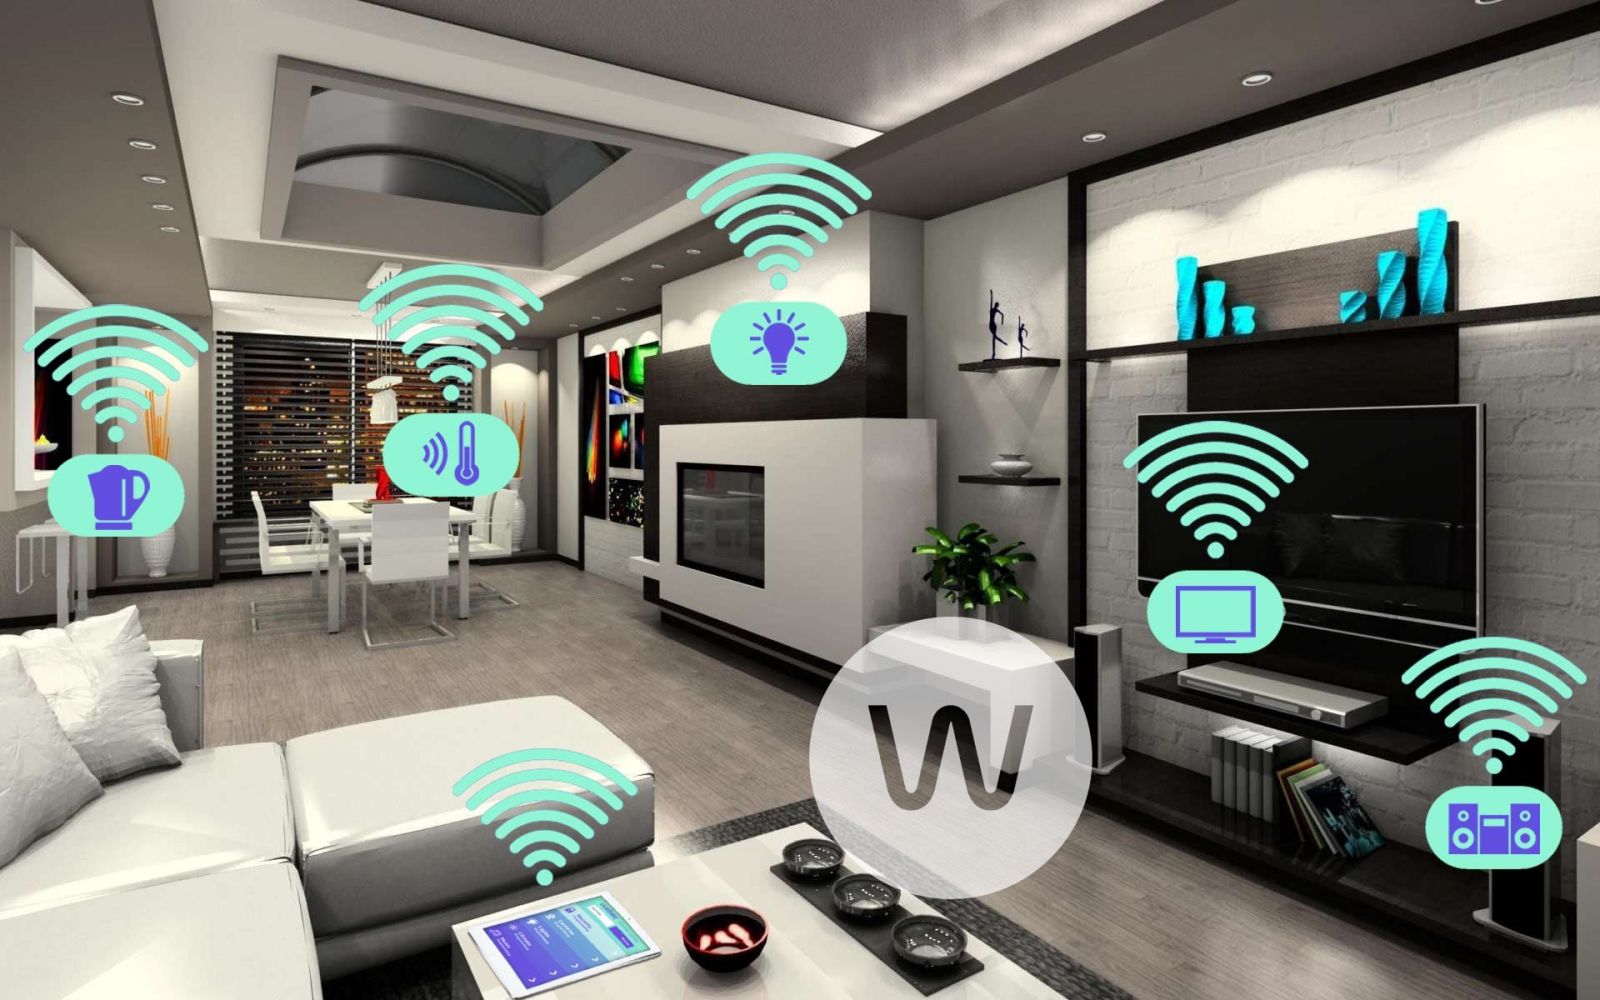 Developers in Vietnam are advised to put more effort into making smart apartment truly smart.